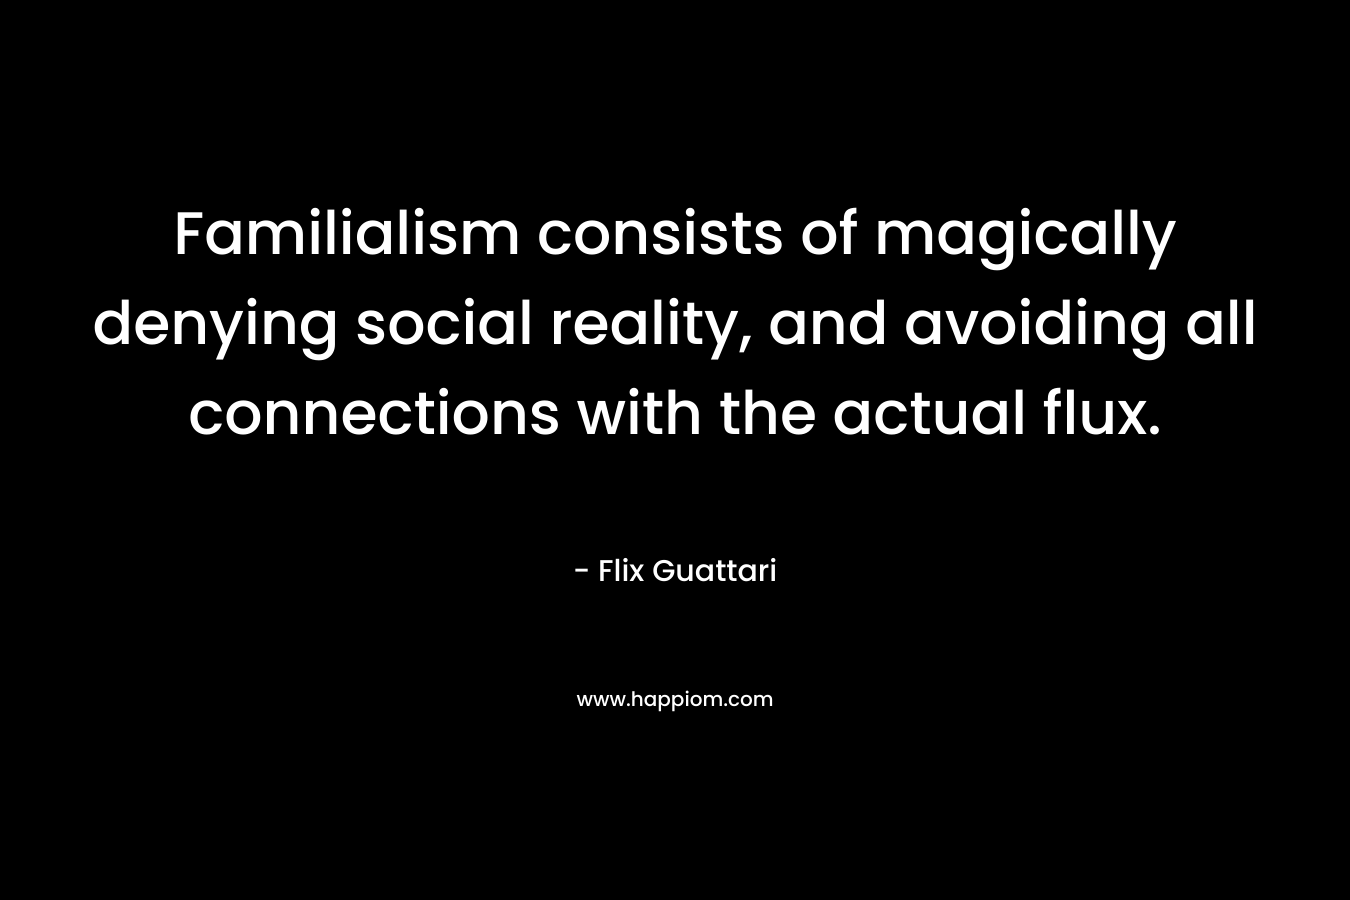 Familialism consists of magically denying social reality, and avoiding all connections with the actual flux.